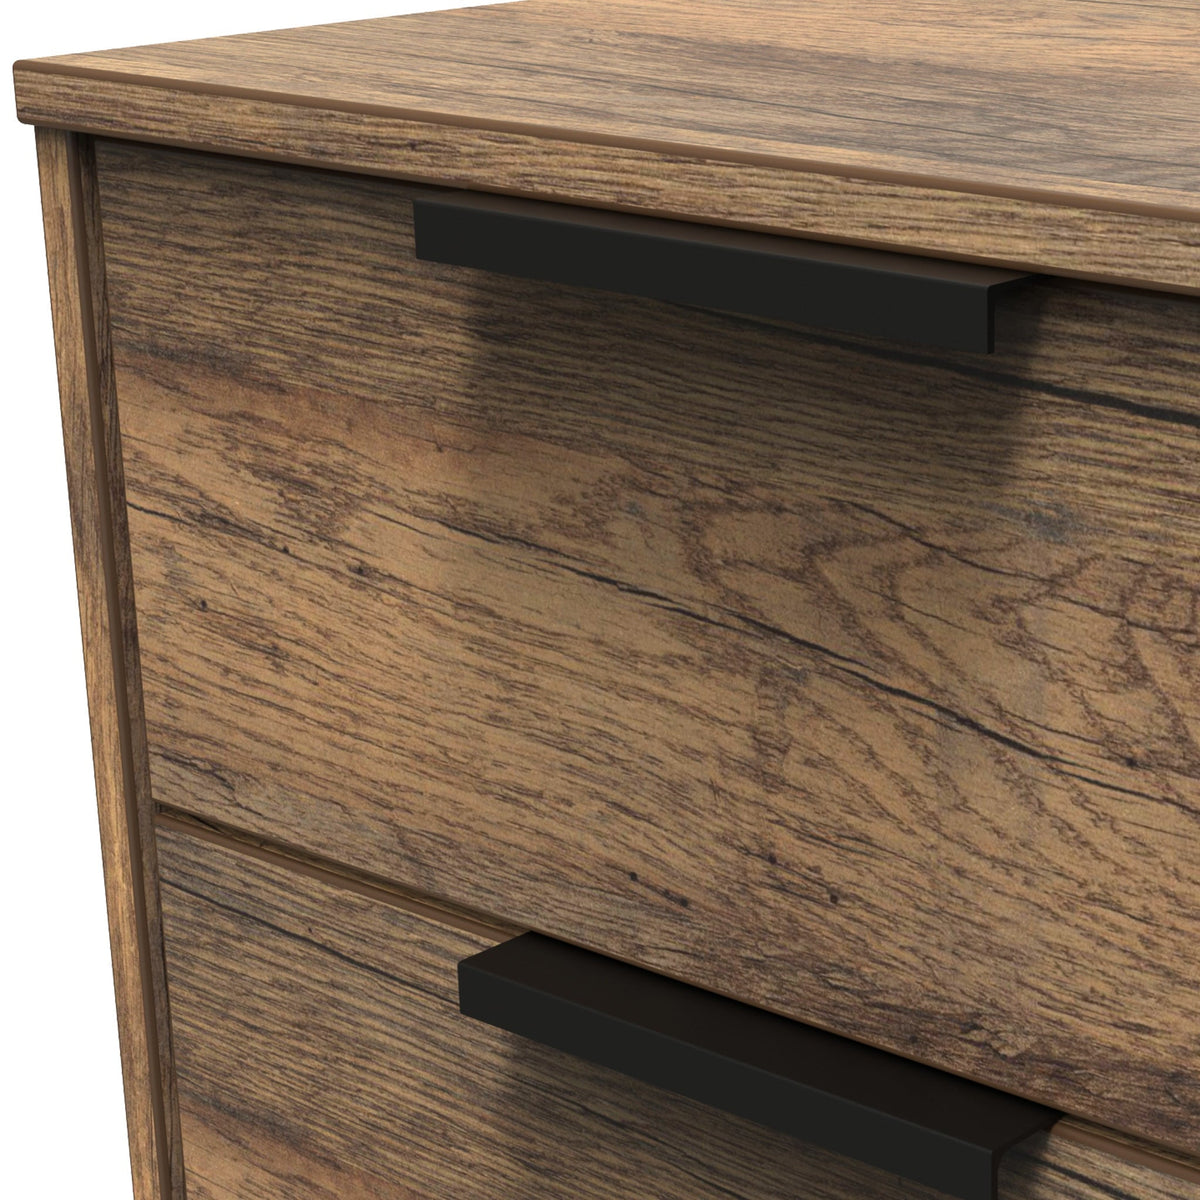 Morena Rustic Oak Effect 2 Drawer Bedside Table with Black Hairpin Legs close up